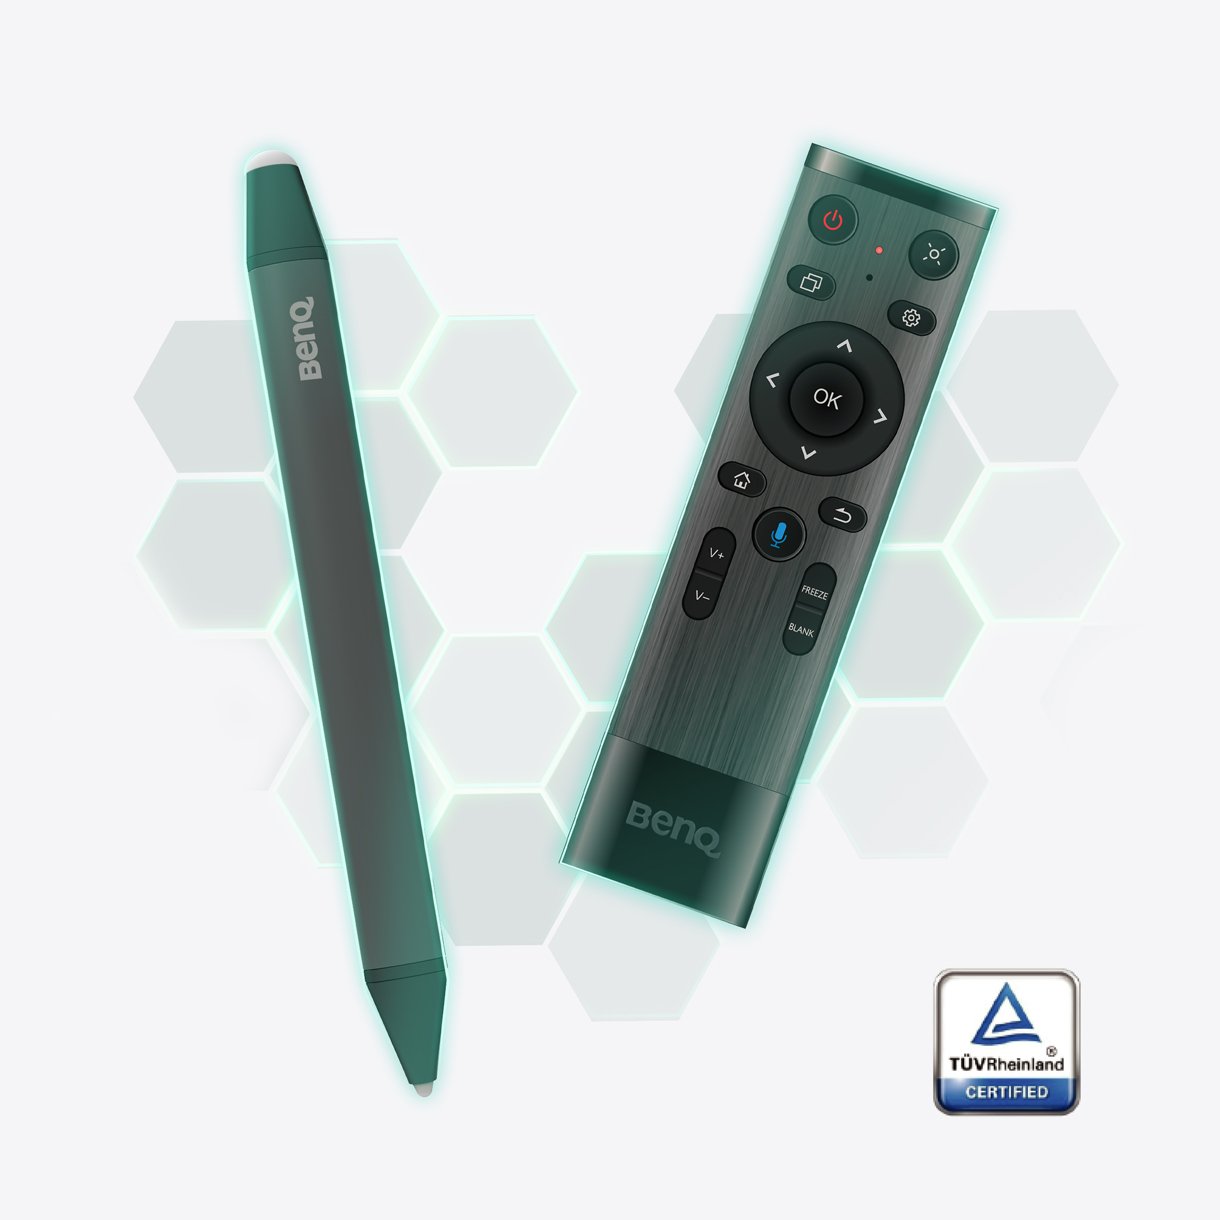 Germ-resistant stylus pen and remote control for the RP03 Pro Series interactive display